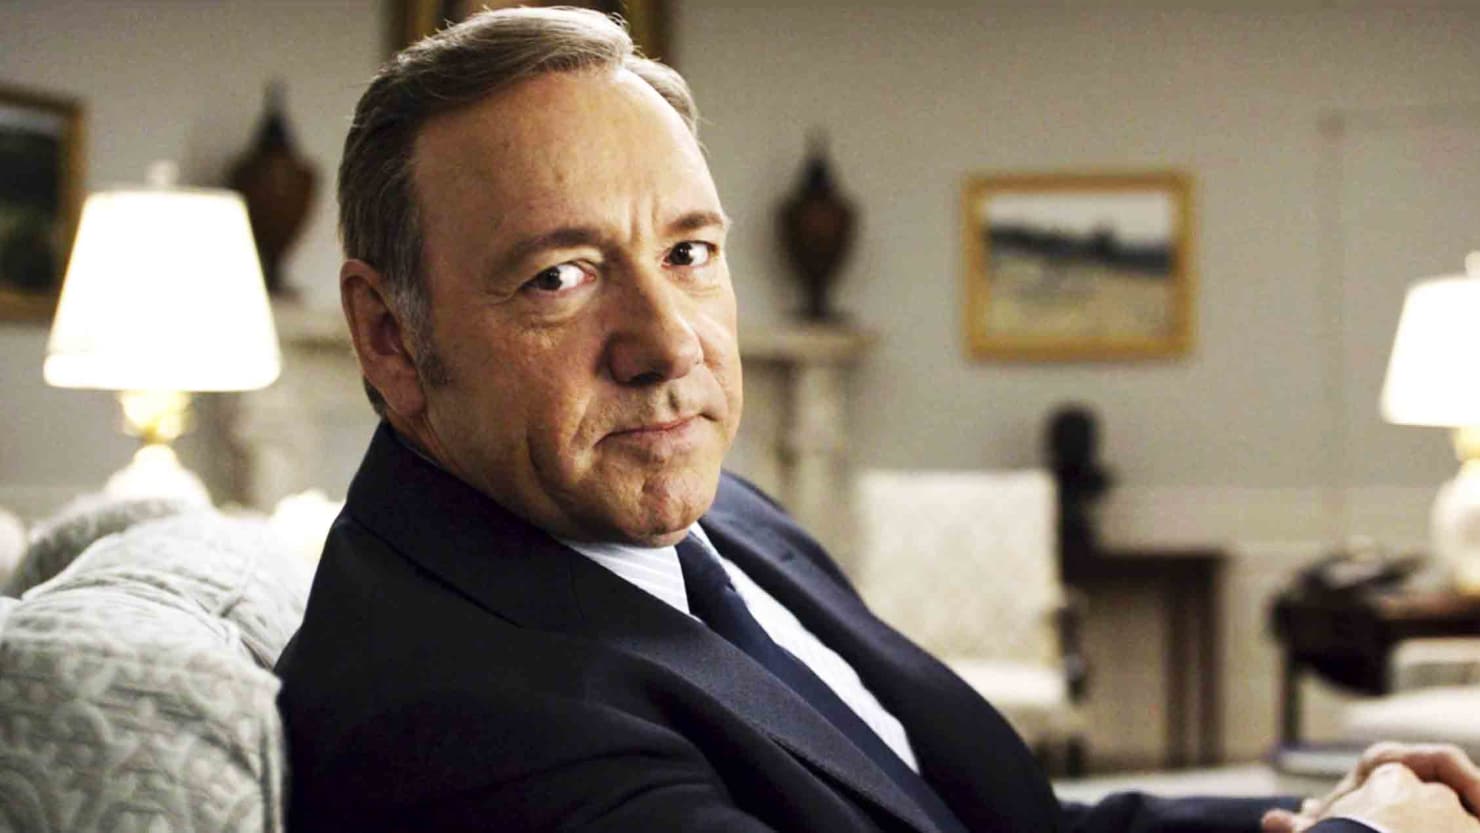 Netflix to End “House of Cards” After Kevin Spacey Allegations